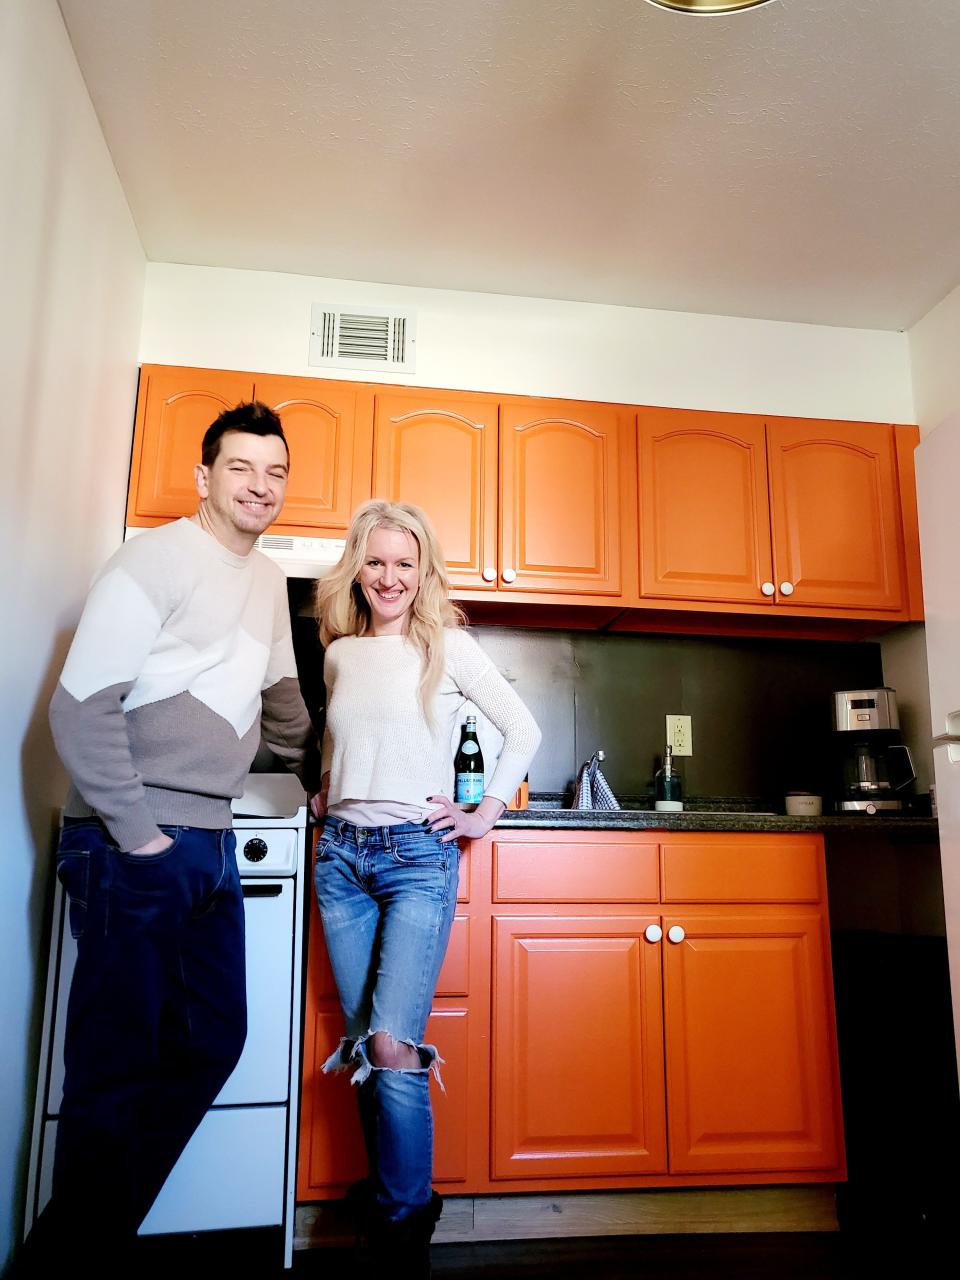 In this after photo, Courier Journal dining columnist Dana McMahan and her business partner Michael recently purchased a small apartment building in Old Louisville where they're renovating several units, with an emphasis on new kitchens.